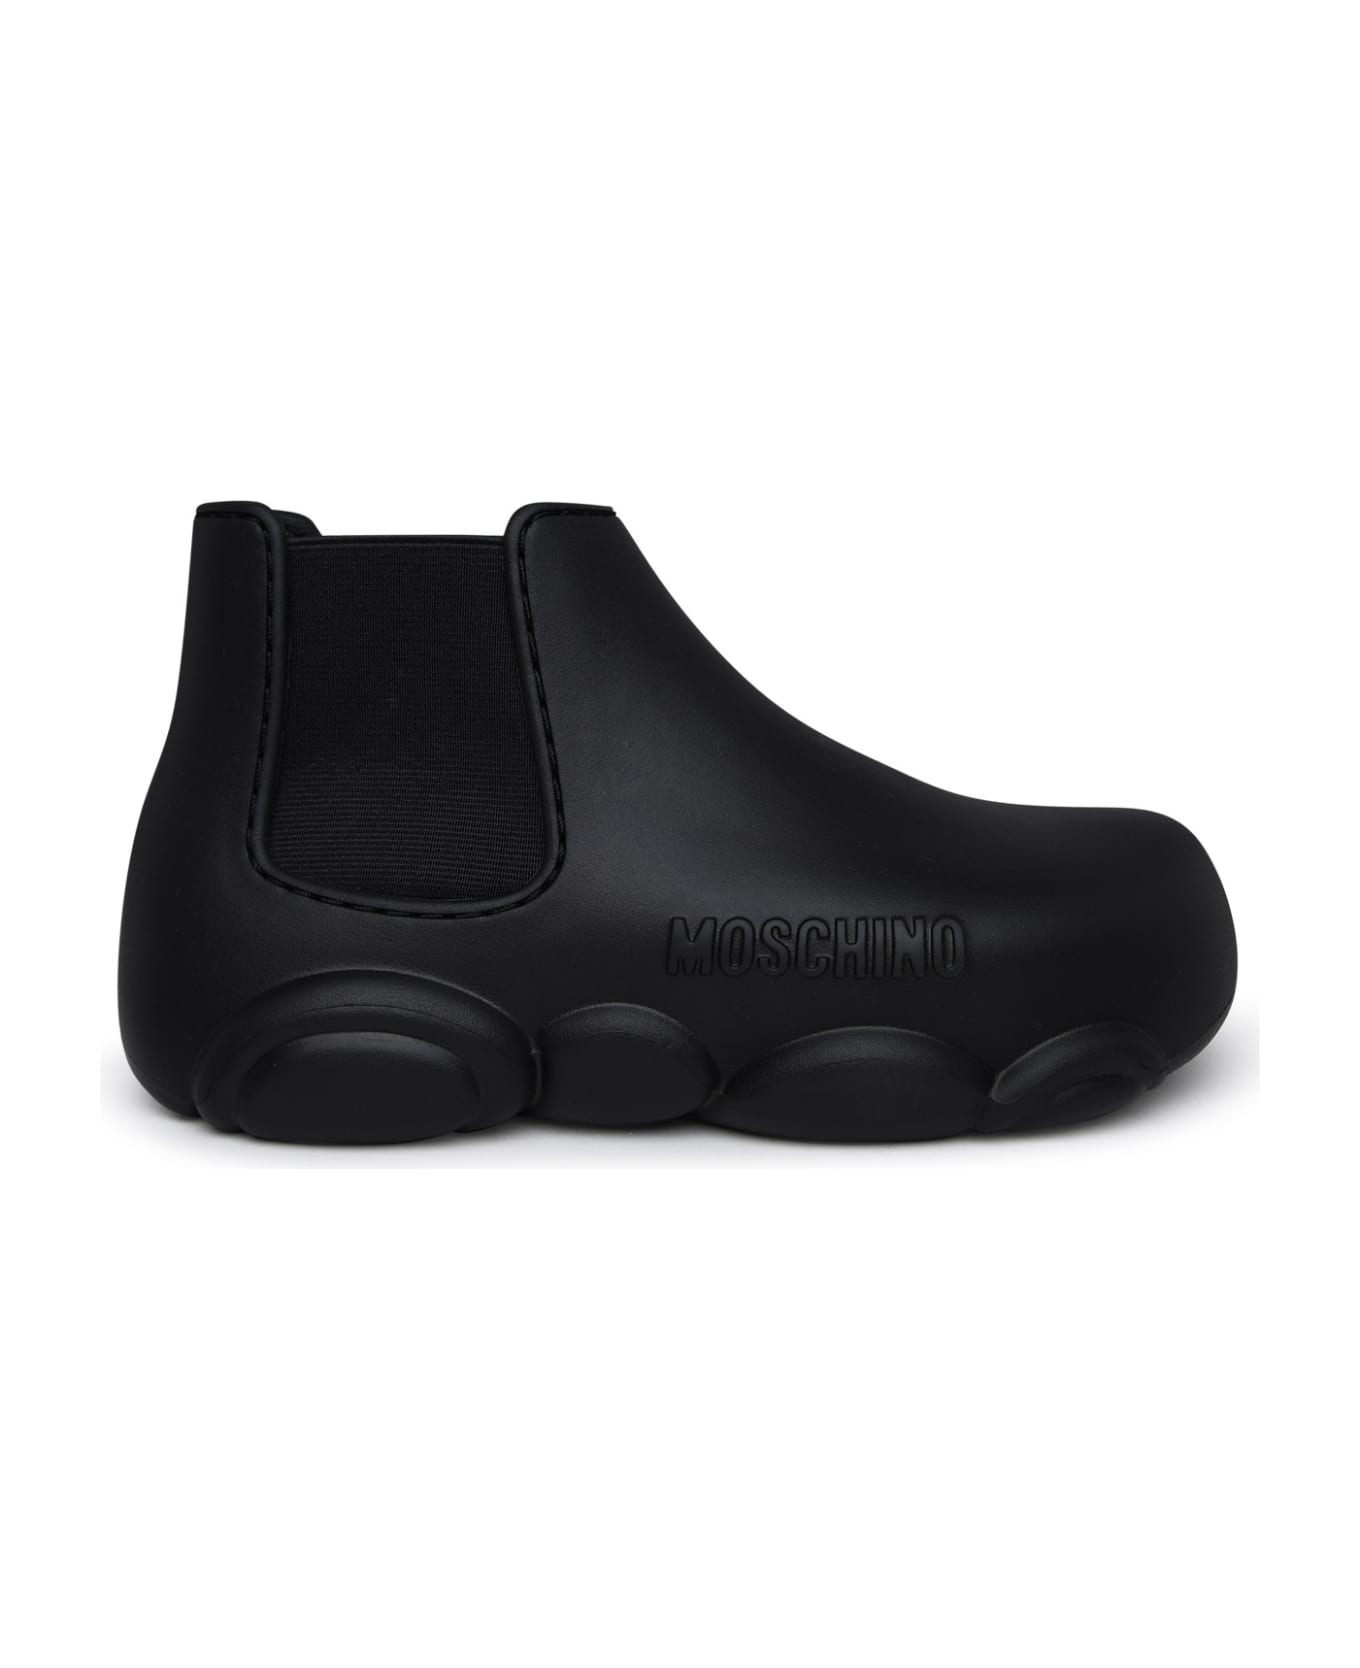 Moschino Black Rubber Ankle Boots - Black